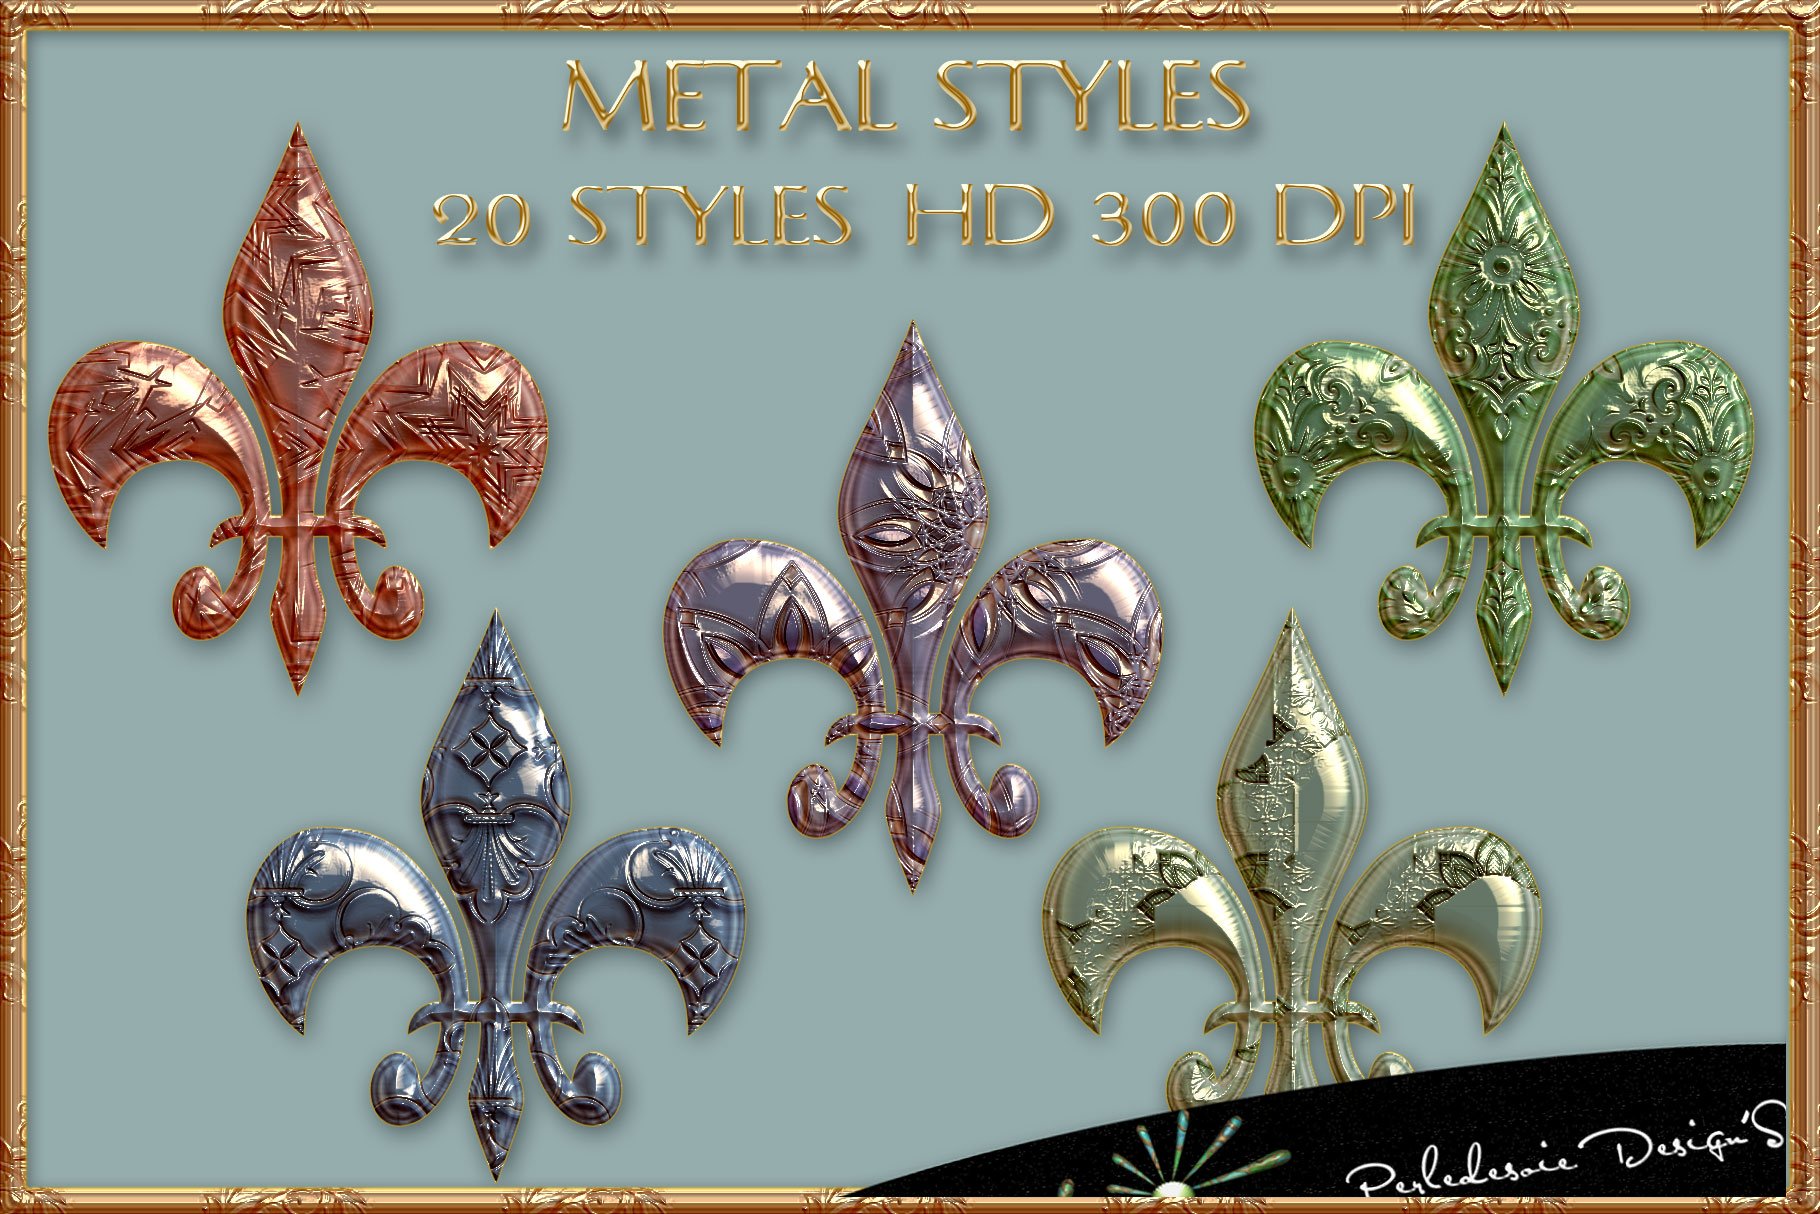 Metal Stylespreview image.